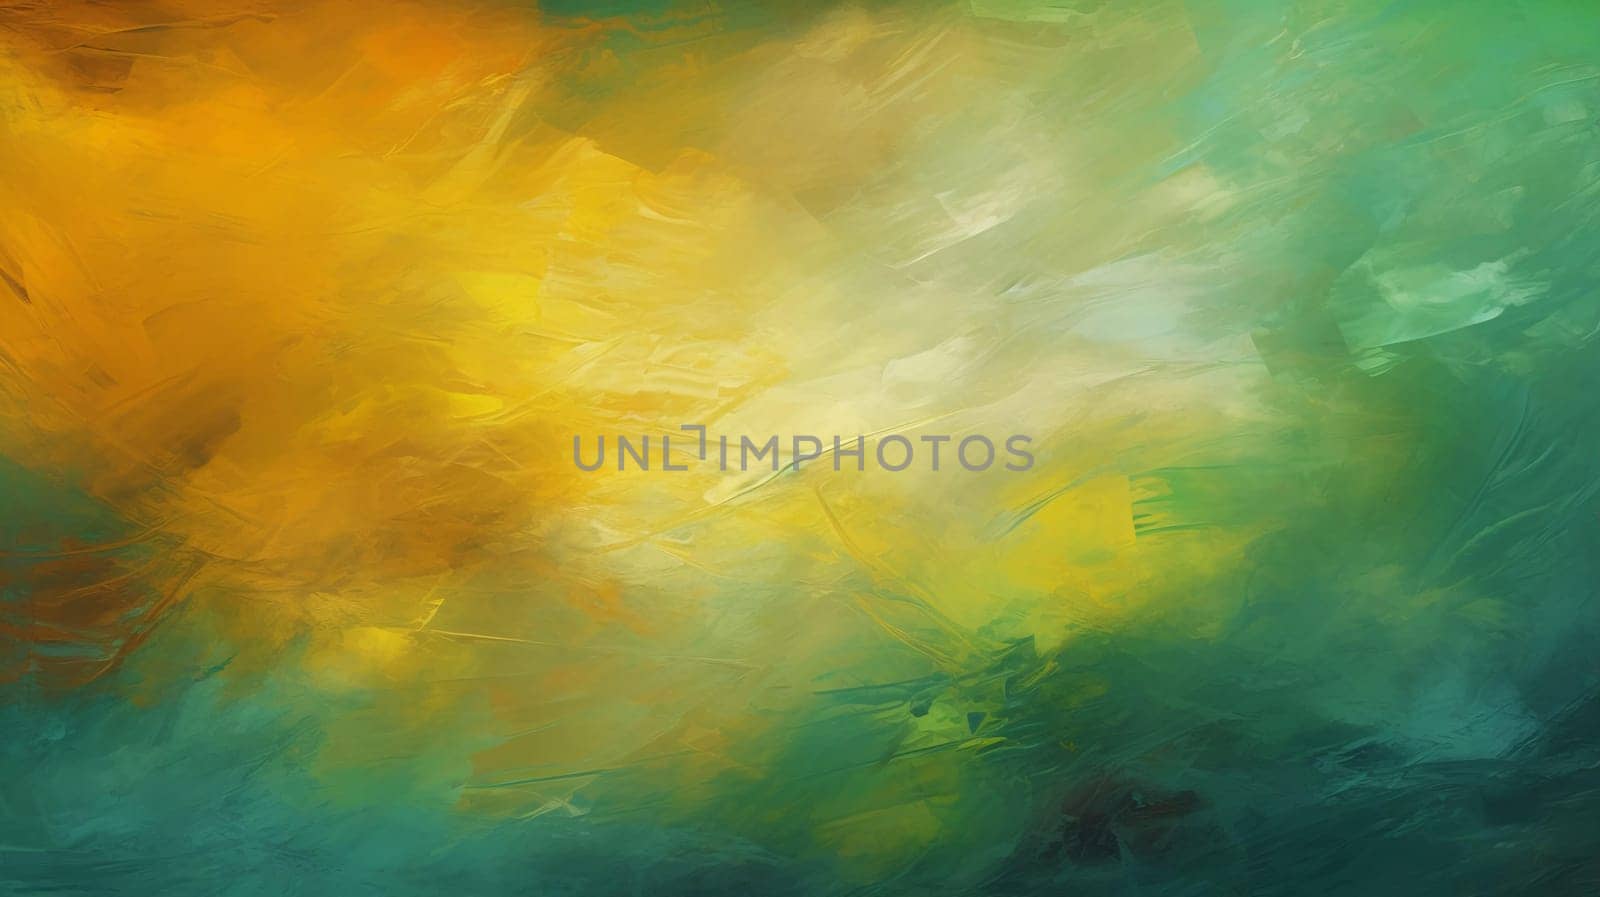 The abstract background is made in grunge style, hand-painted in brown, green, yellow and dark blue colors